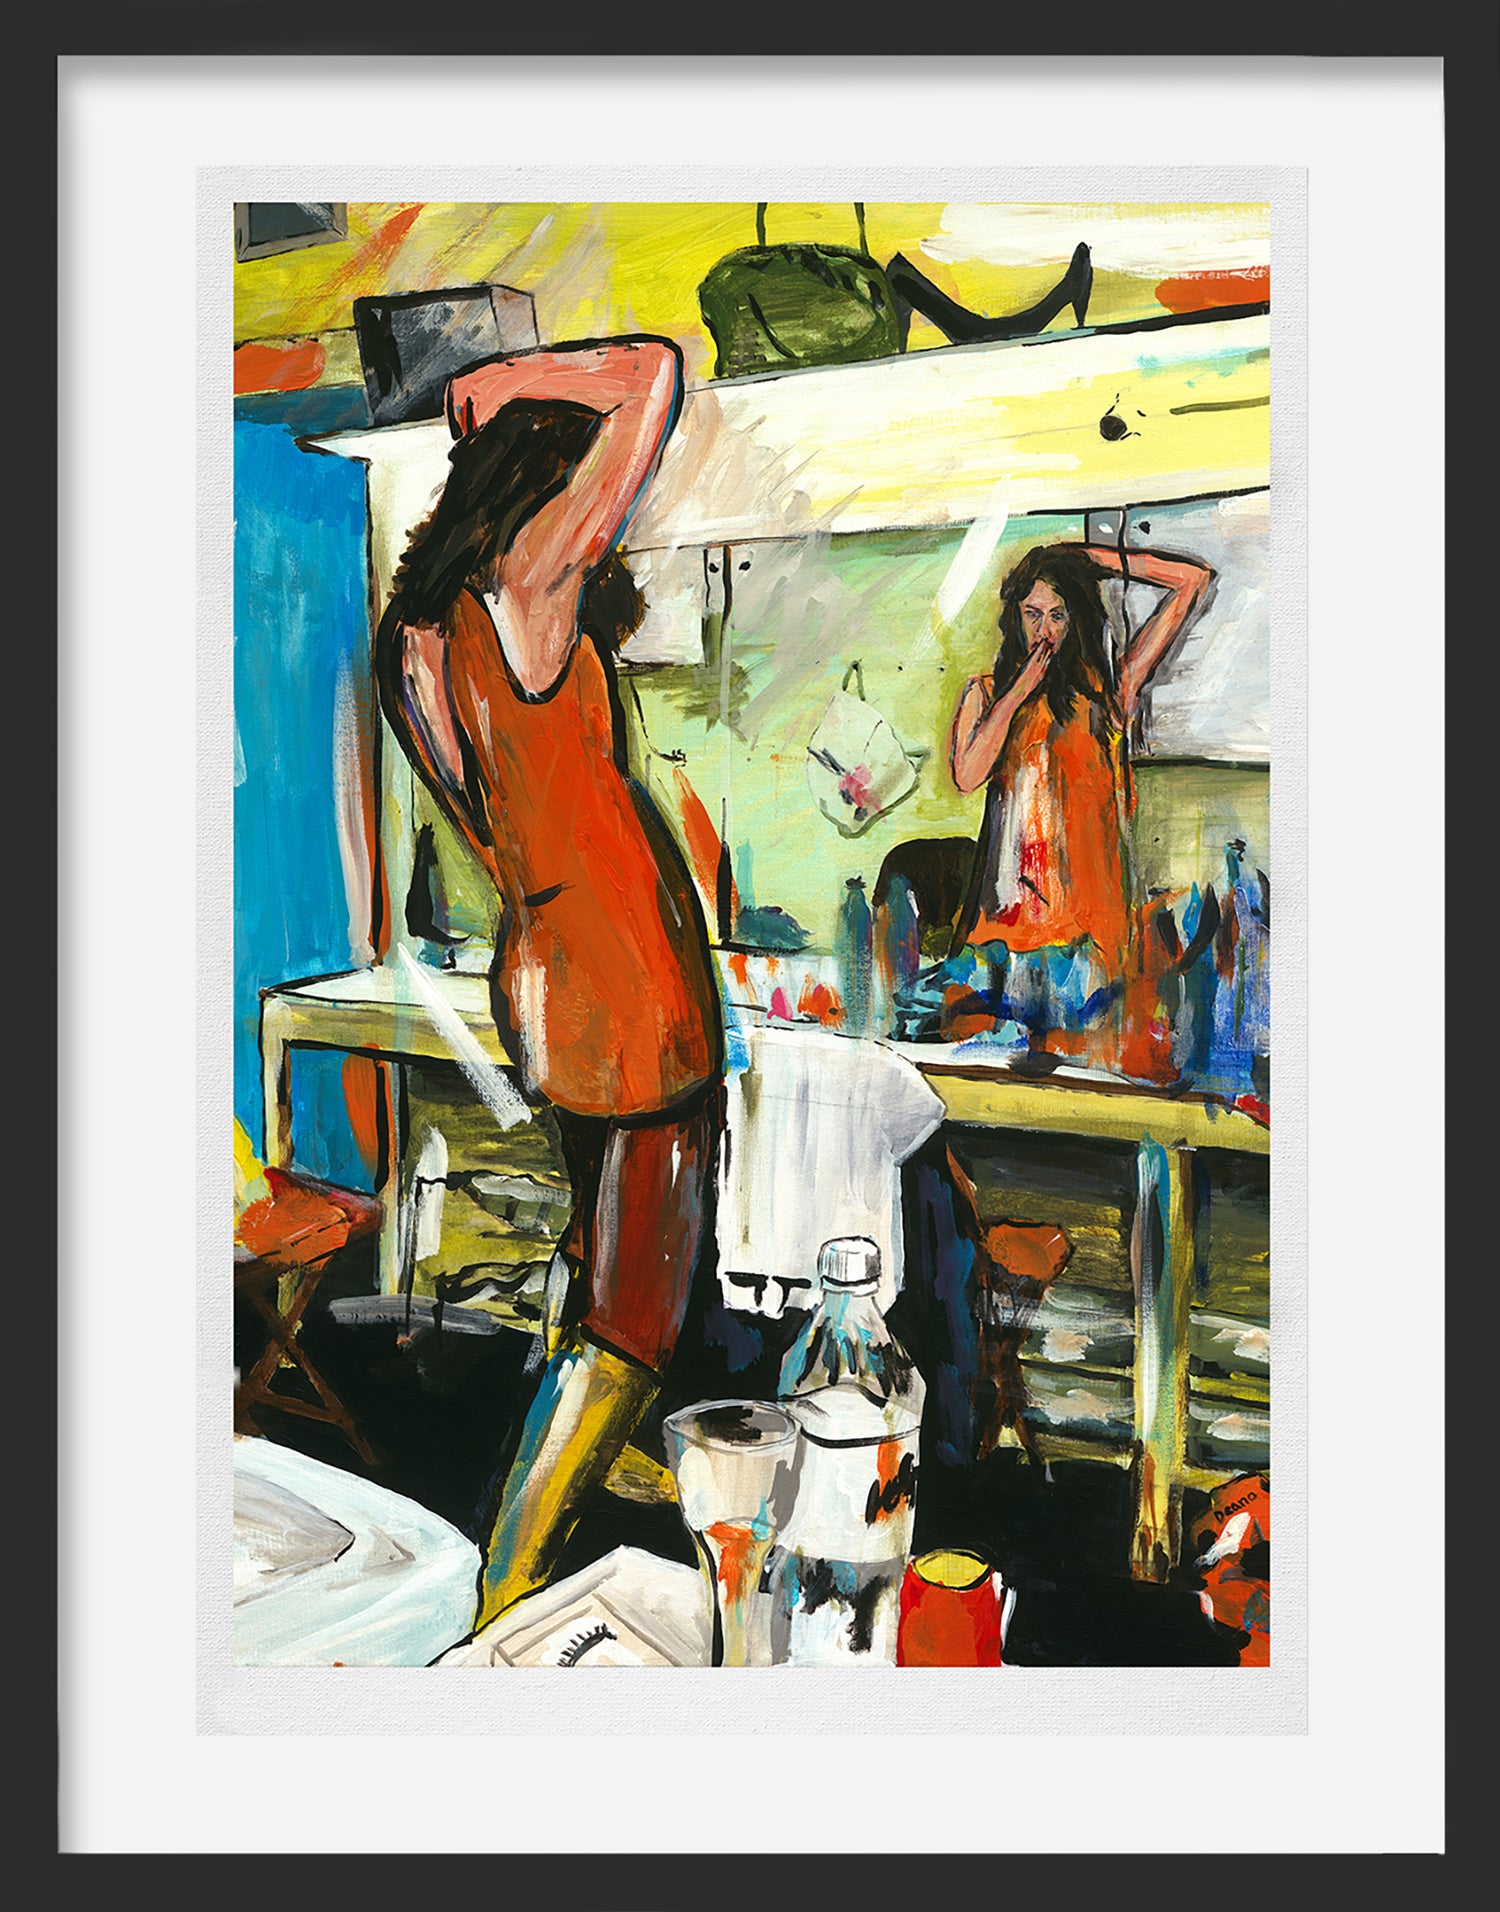 Limited-edition print depicting a woman preparing for a performance in her dressing room, surrounded by the tools of her trade.